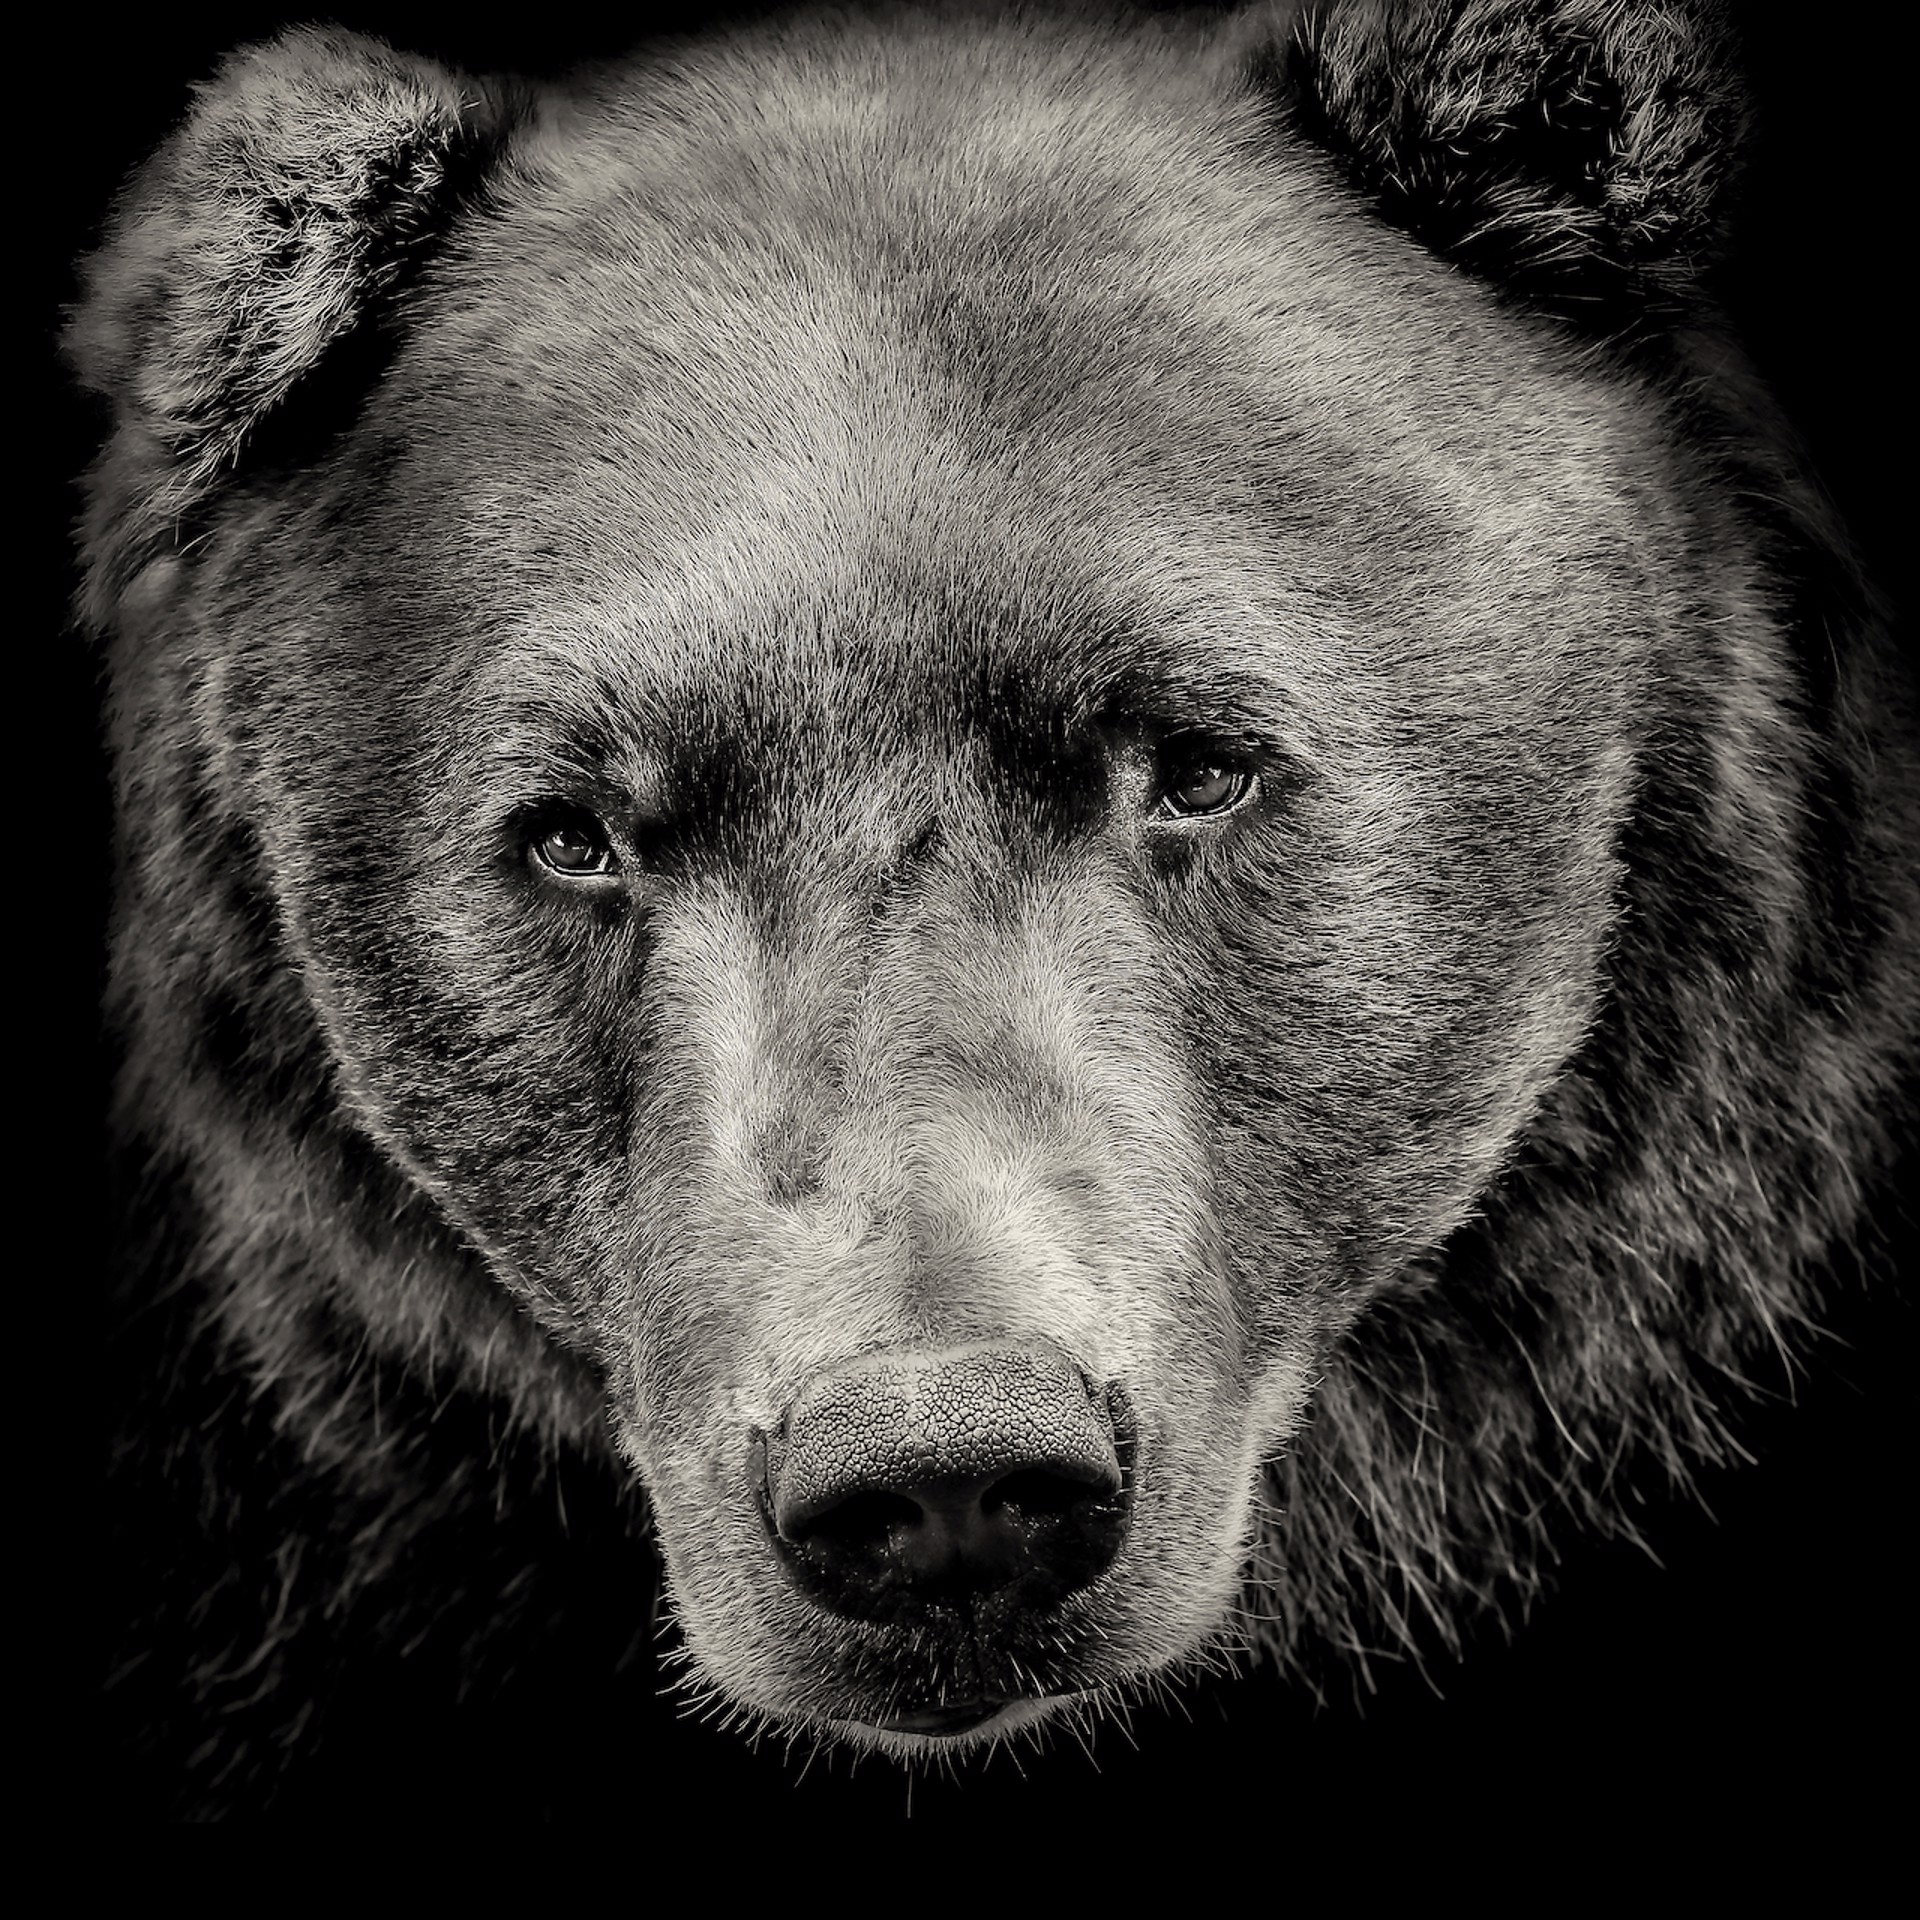 Portrait of a Grizzly Bear by Lauren Chambers